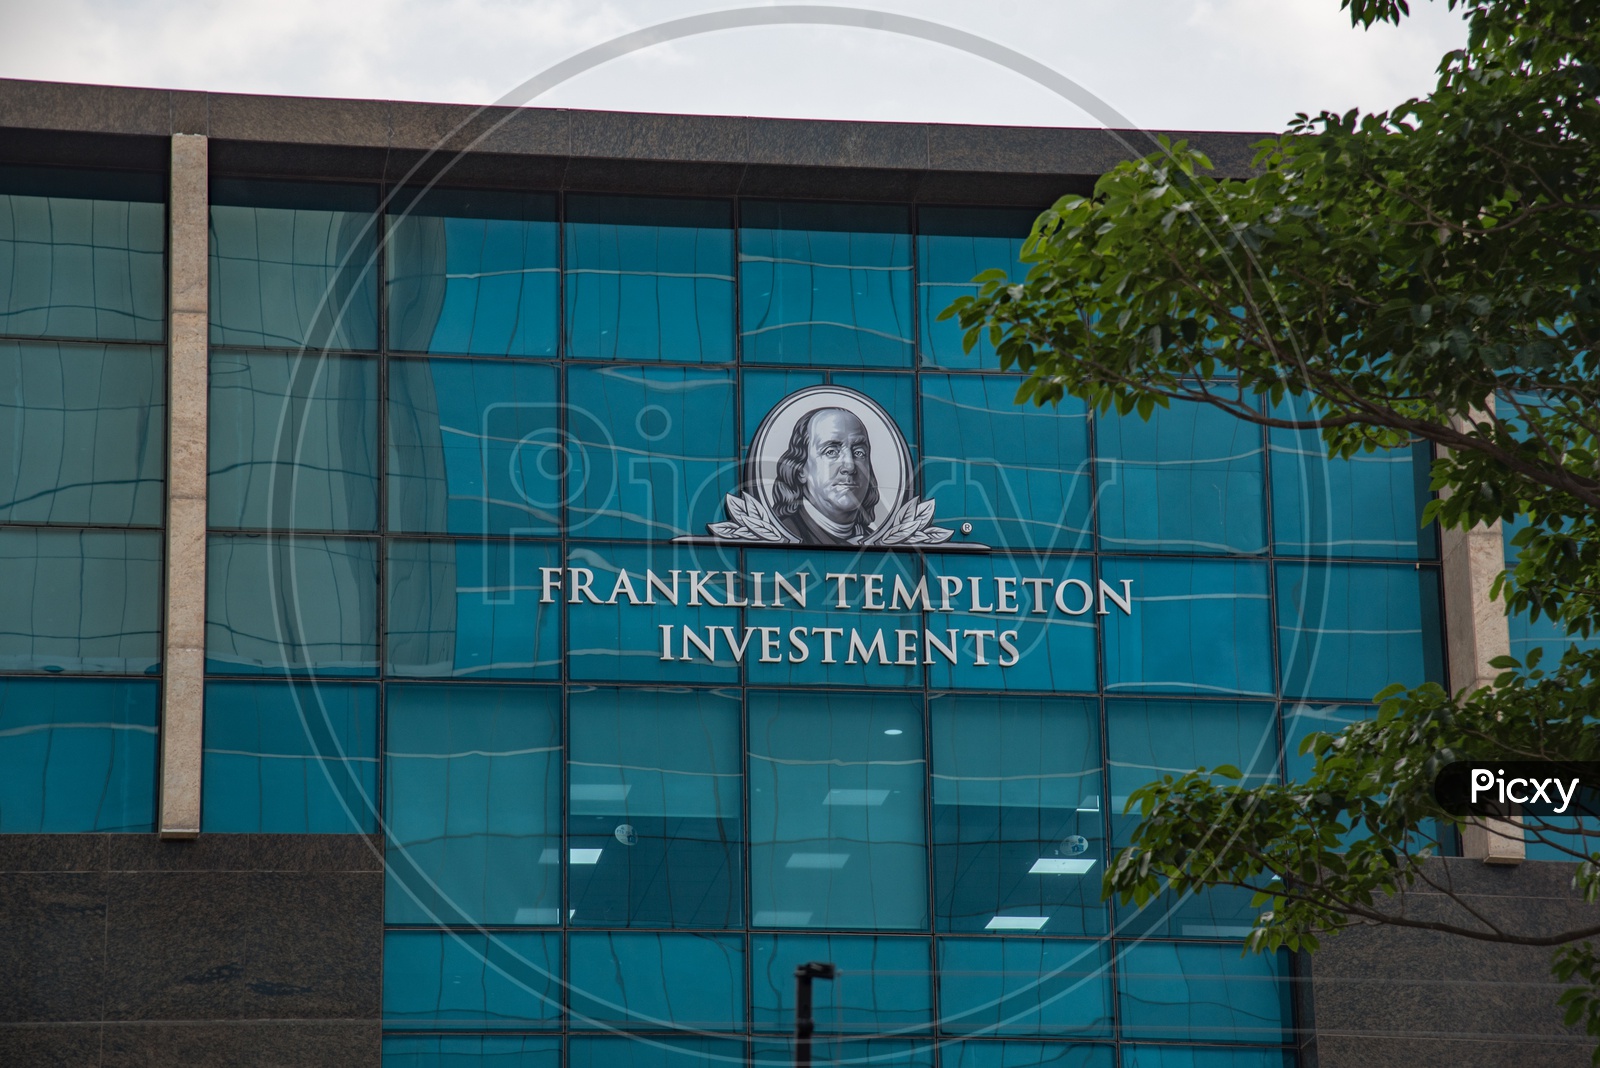 Franklin Templeton Investments Company